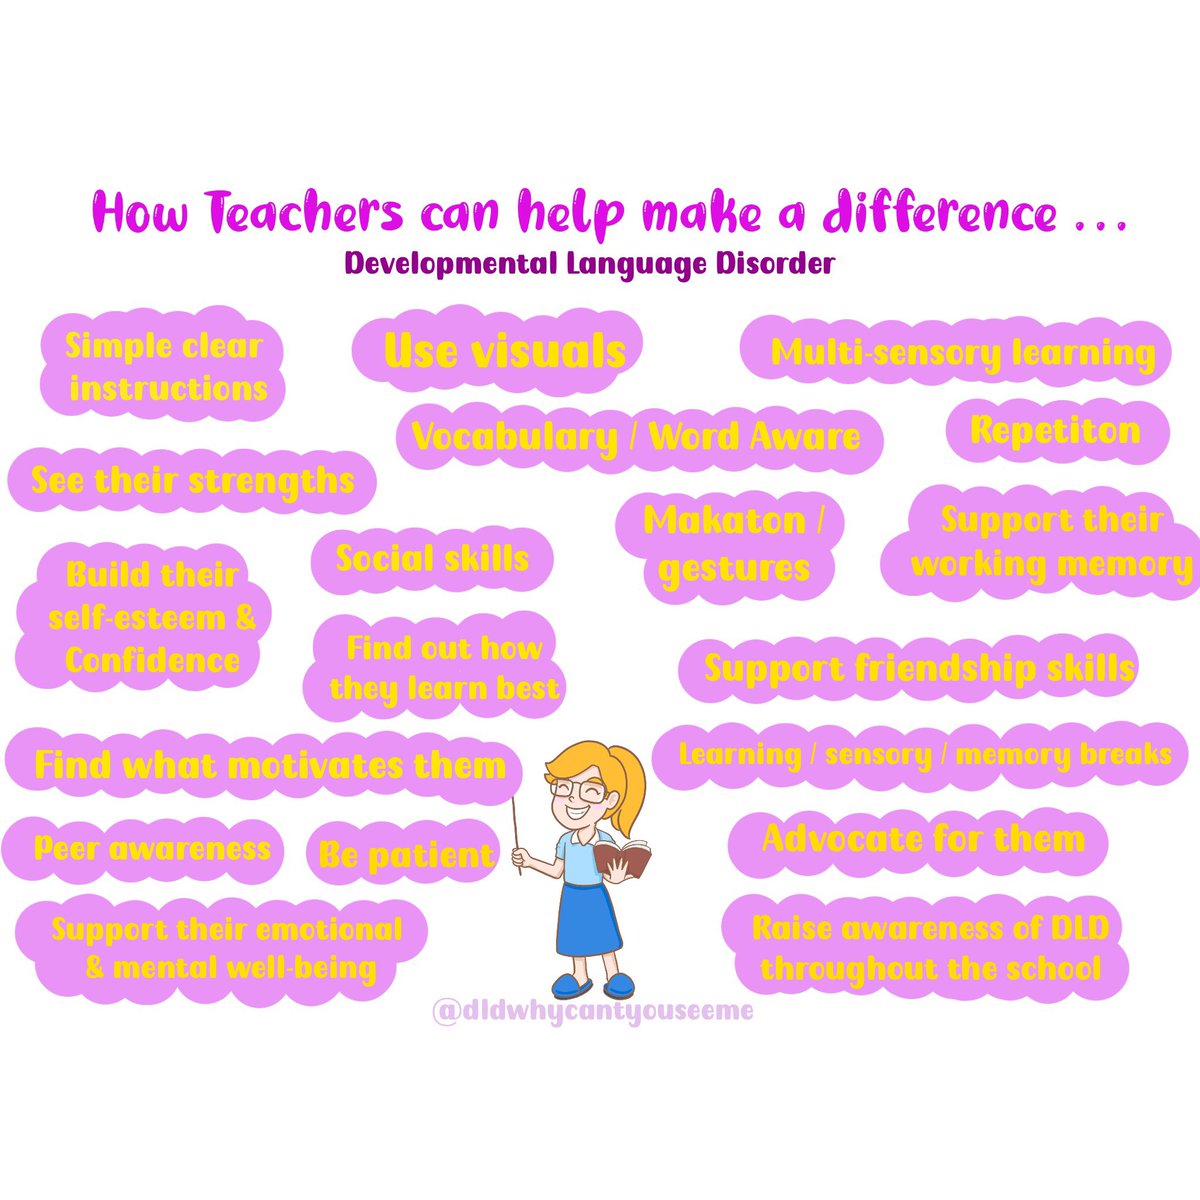 ✨ Teachers YOU can make a difference! ✨ 

Here are some simple suggestions to help those with DLD in your classroom 💜 

#dldwhycantyouseeme #developmentallanguagedisorder #devlangdis #thinkdld #Neurodiversity #teacher #school #education #slcn #invisibledisability